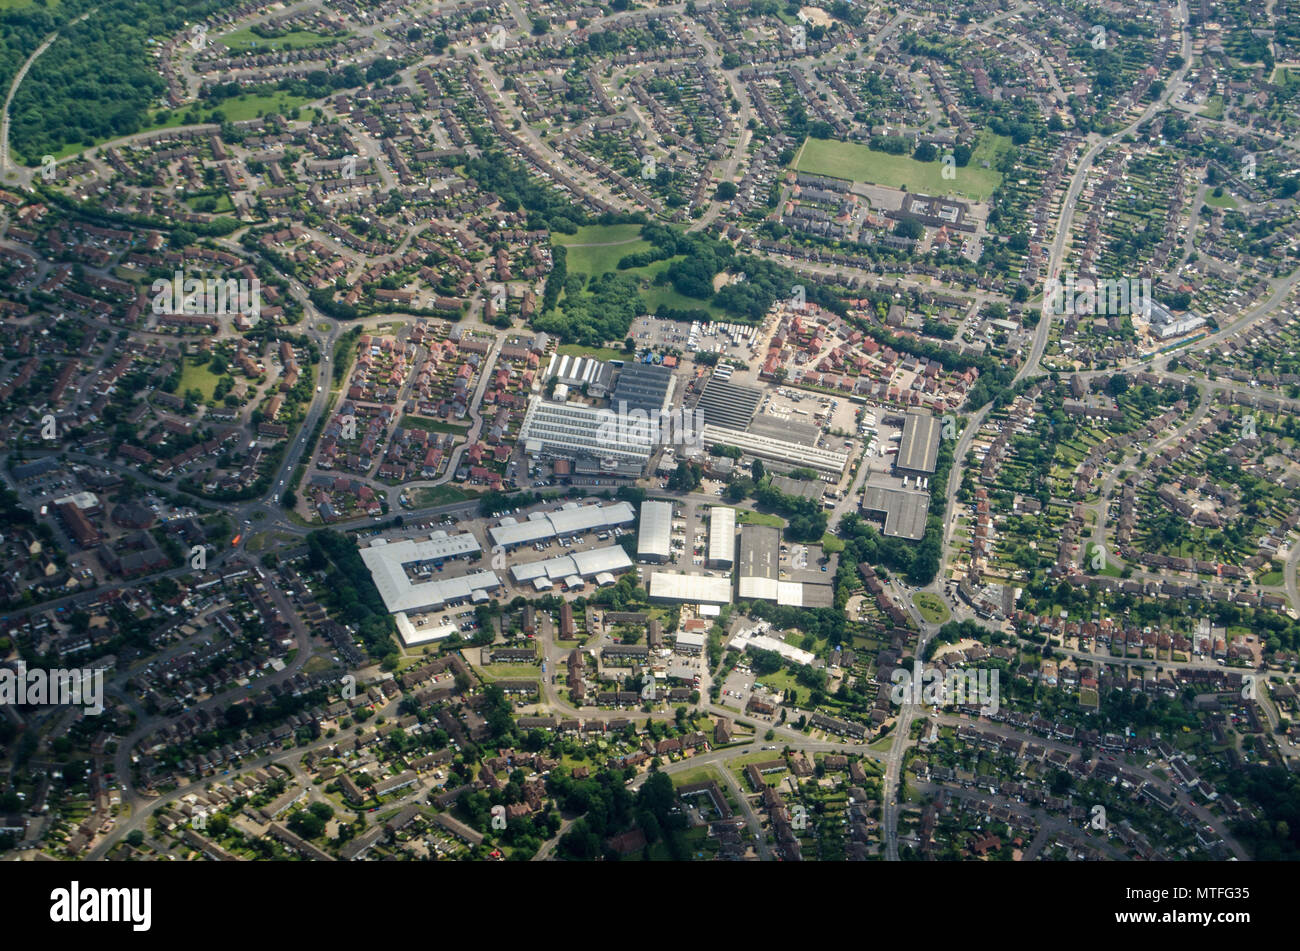 Aerial view of an out of town shopping centre in the Sandford area of Reading, Berkshire.  The centre includes shops and leisure facilities.  Viewed o Stock Photo